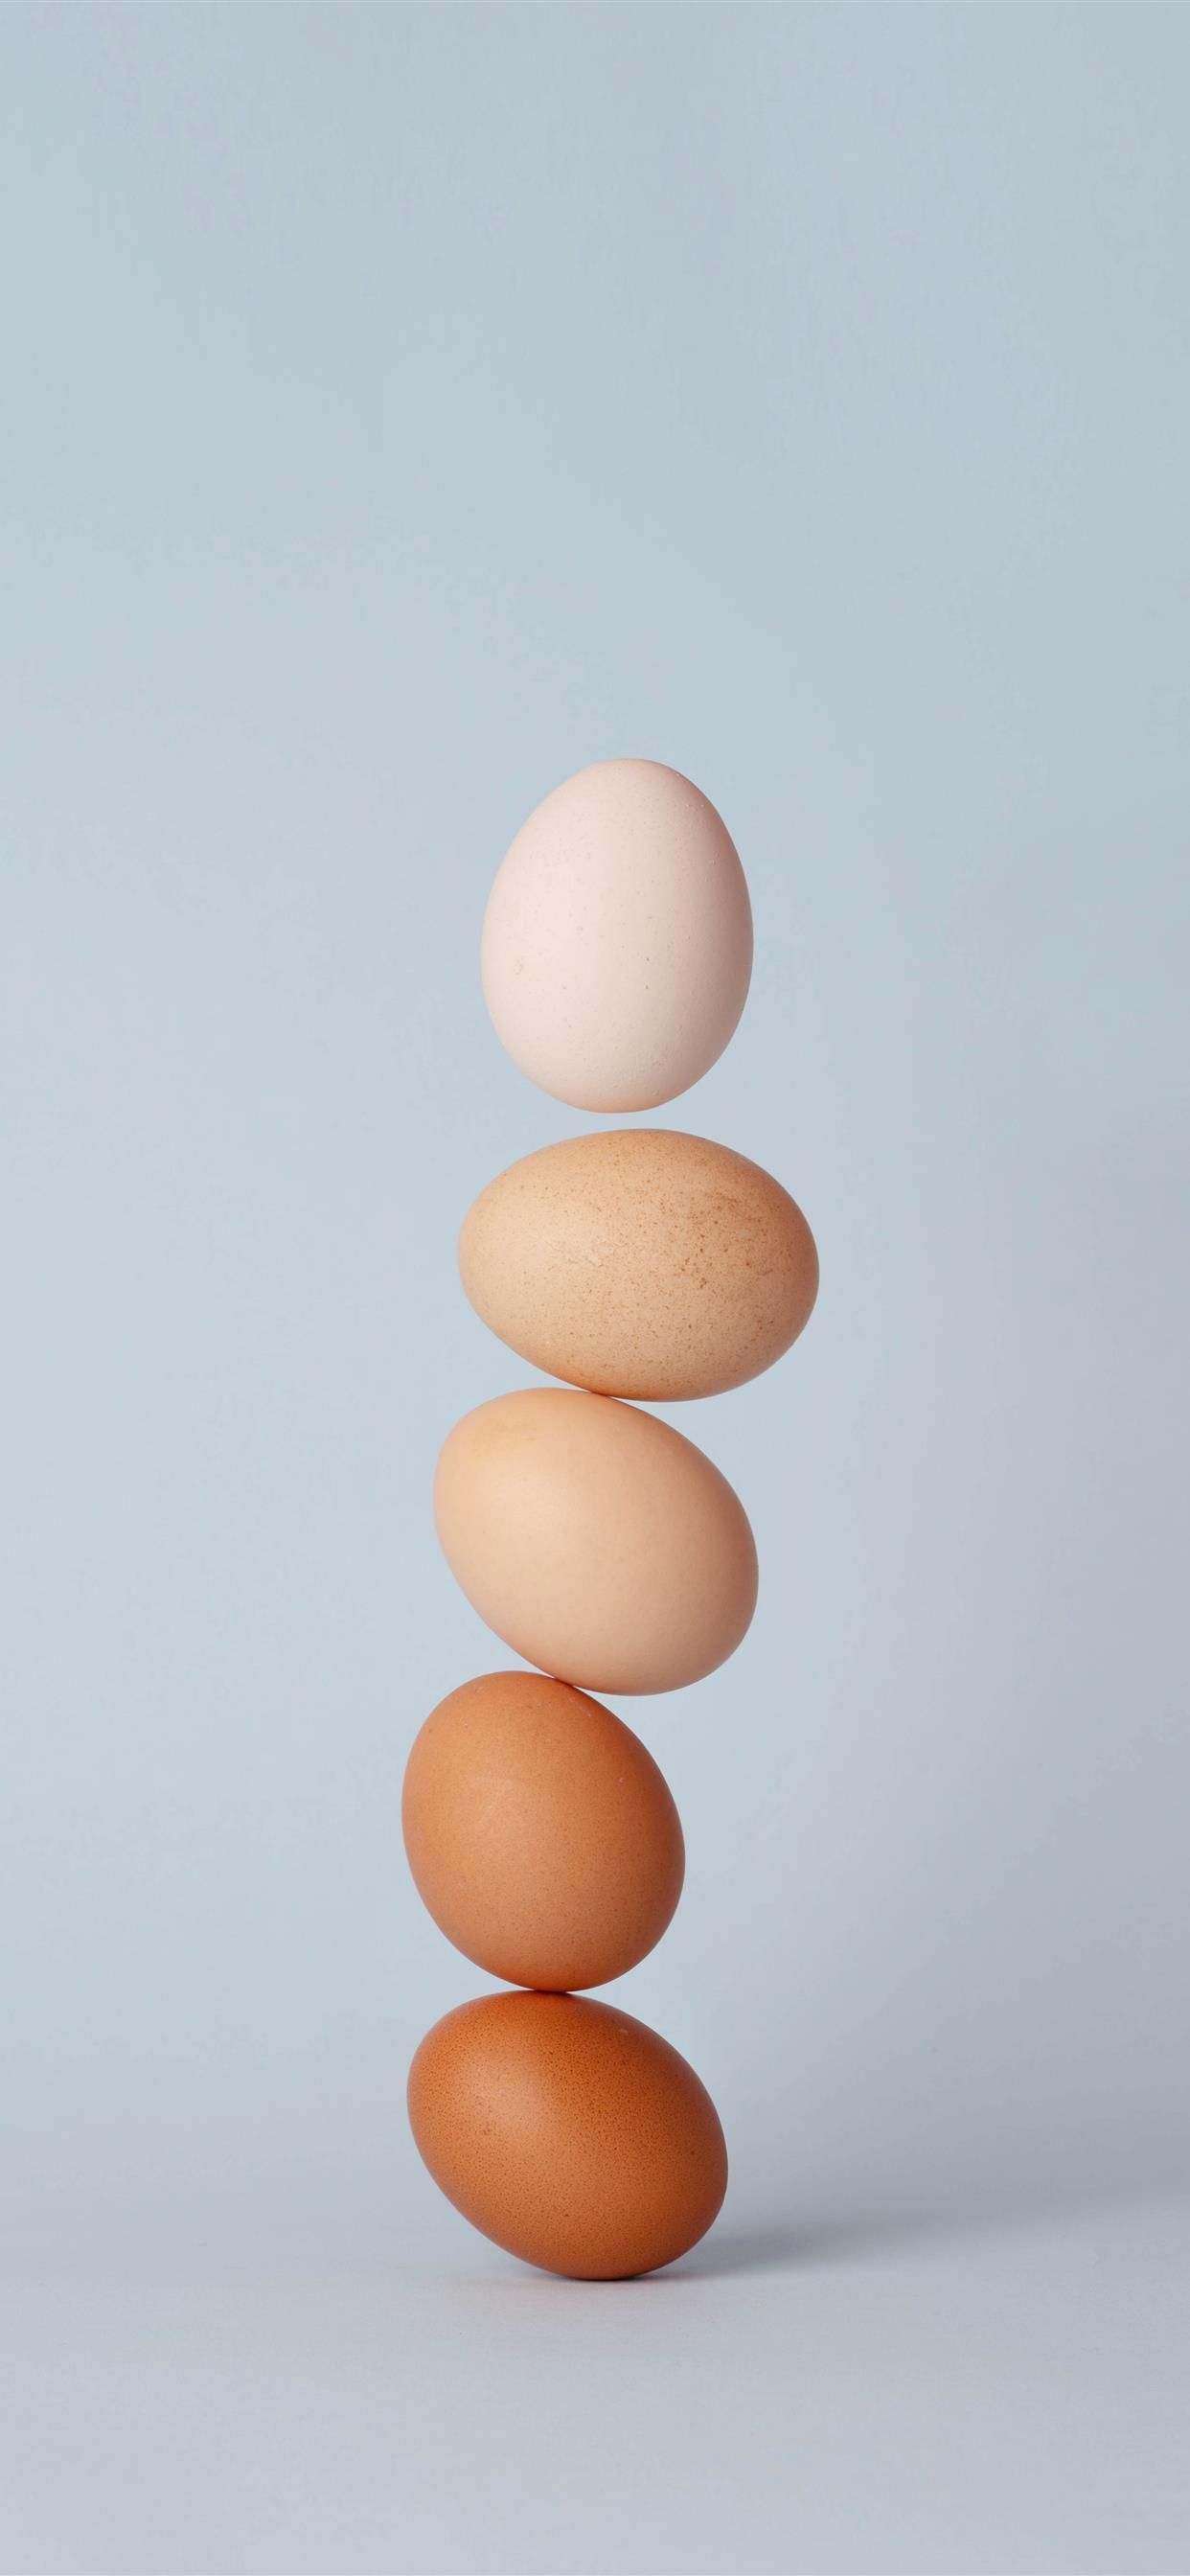 A stack of five eggs of varying shades of brown and white on a light blue background - Egg